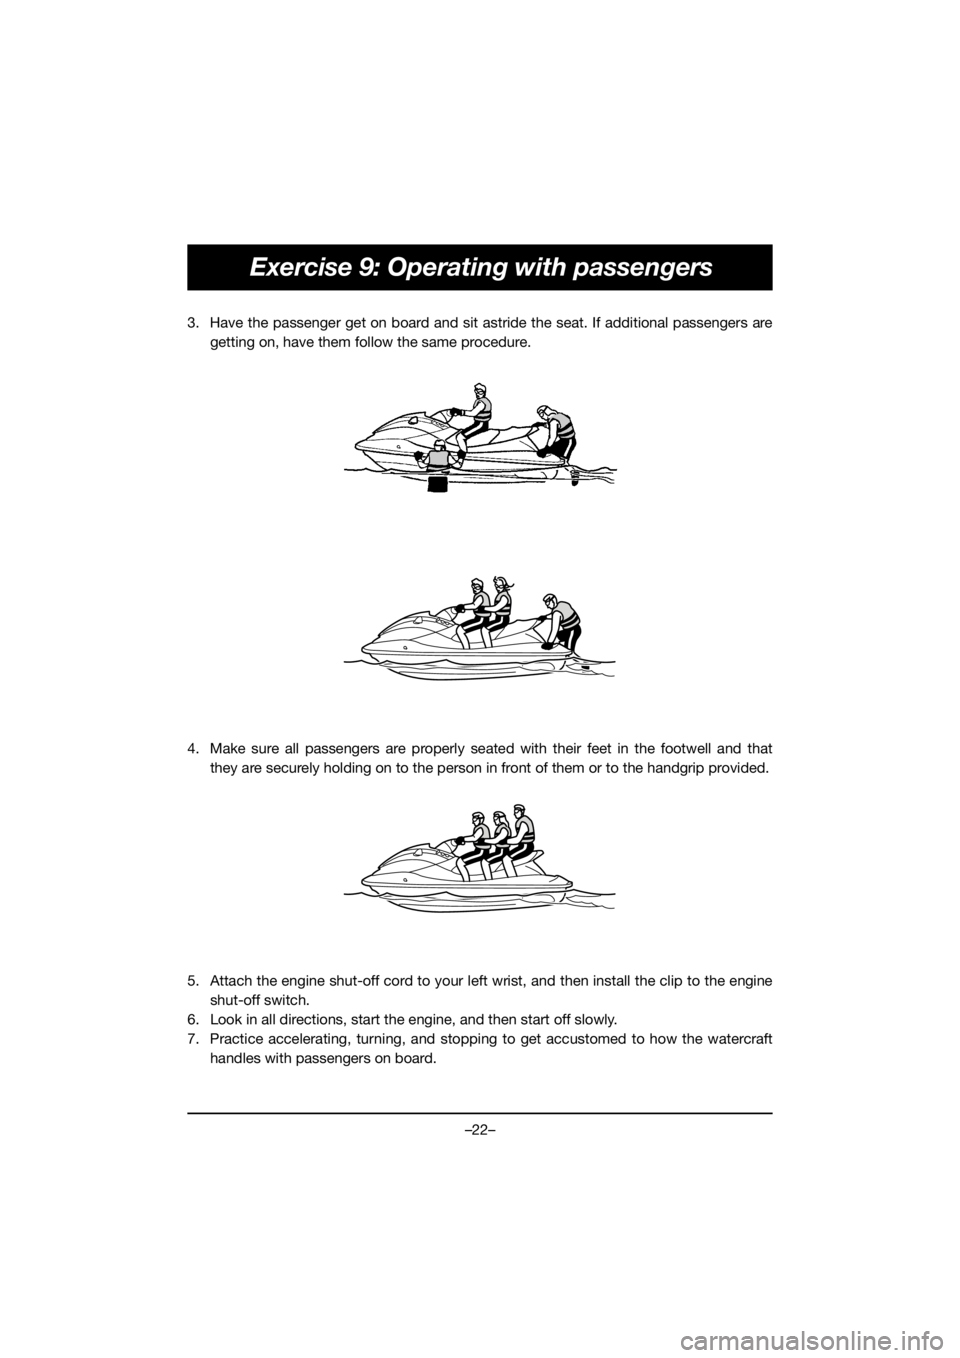 YAMAHA GP1800R SVHO 2020  Notices Demploi (in French) –22–
Exercise 9: Operating with passengers
3. Have the passenger get on board and sit astride the seat. If additional passengers are
getting on, have them follow the same procedure. 
4. Make sure 